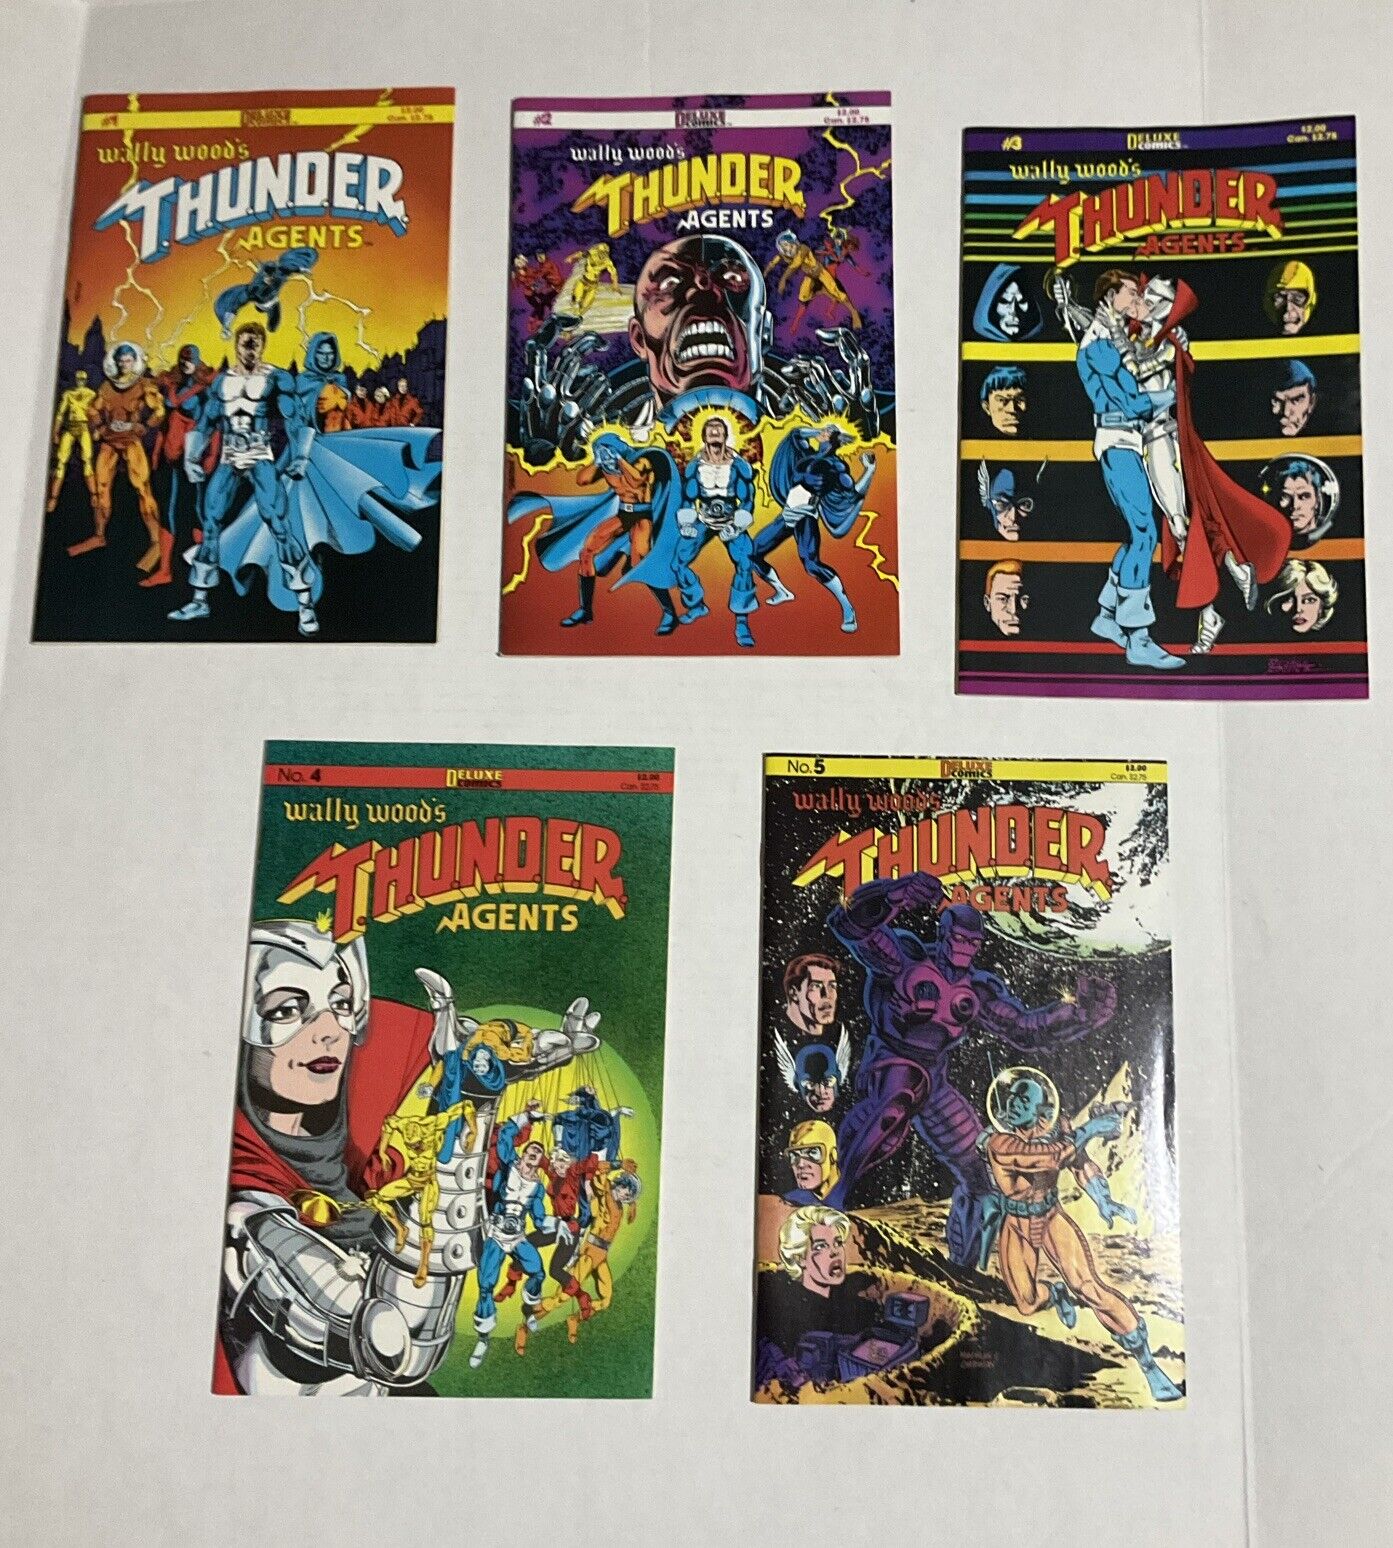 Wally Wood's Thunder Agents #1-5 - Deluxe Comics - Nov84 to Oct86 - 